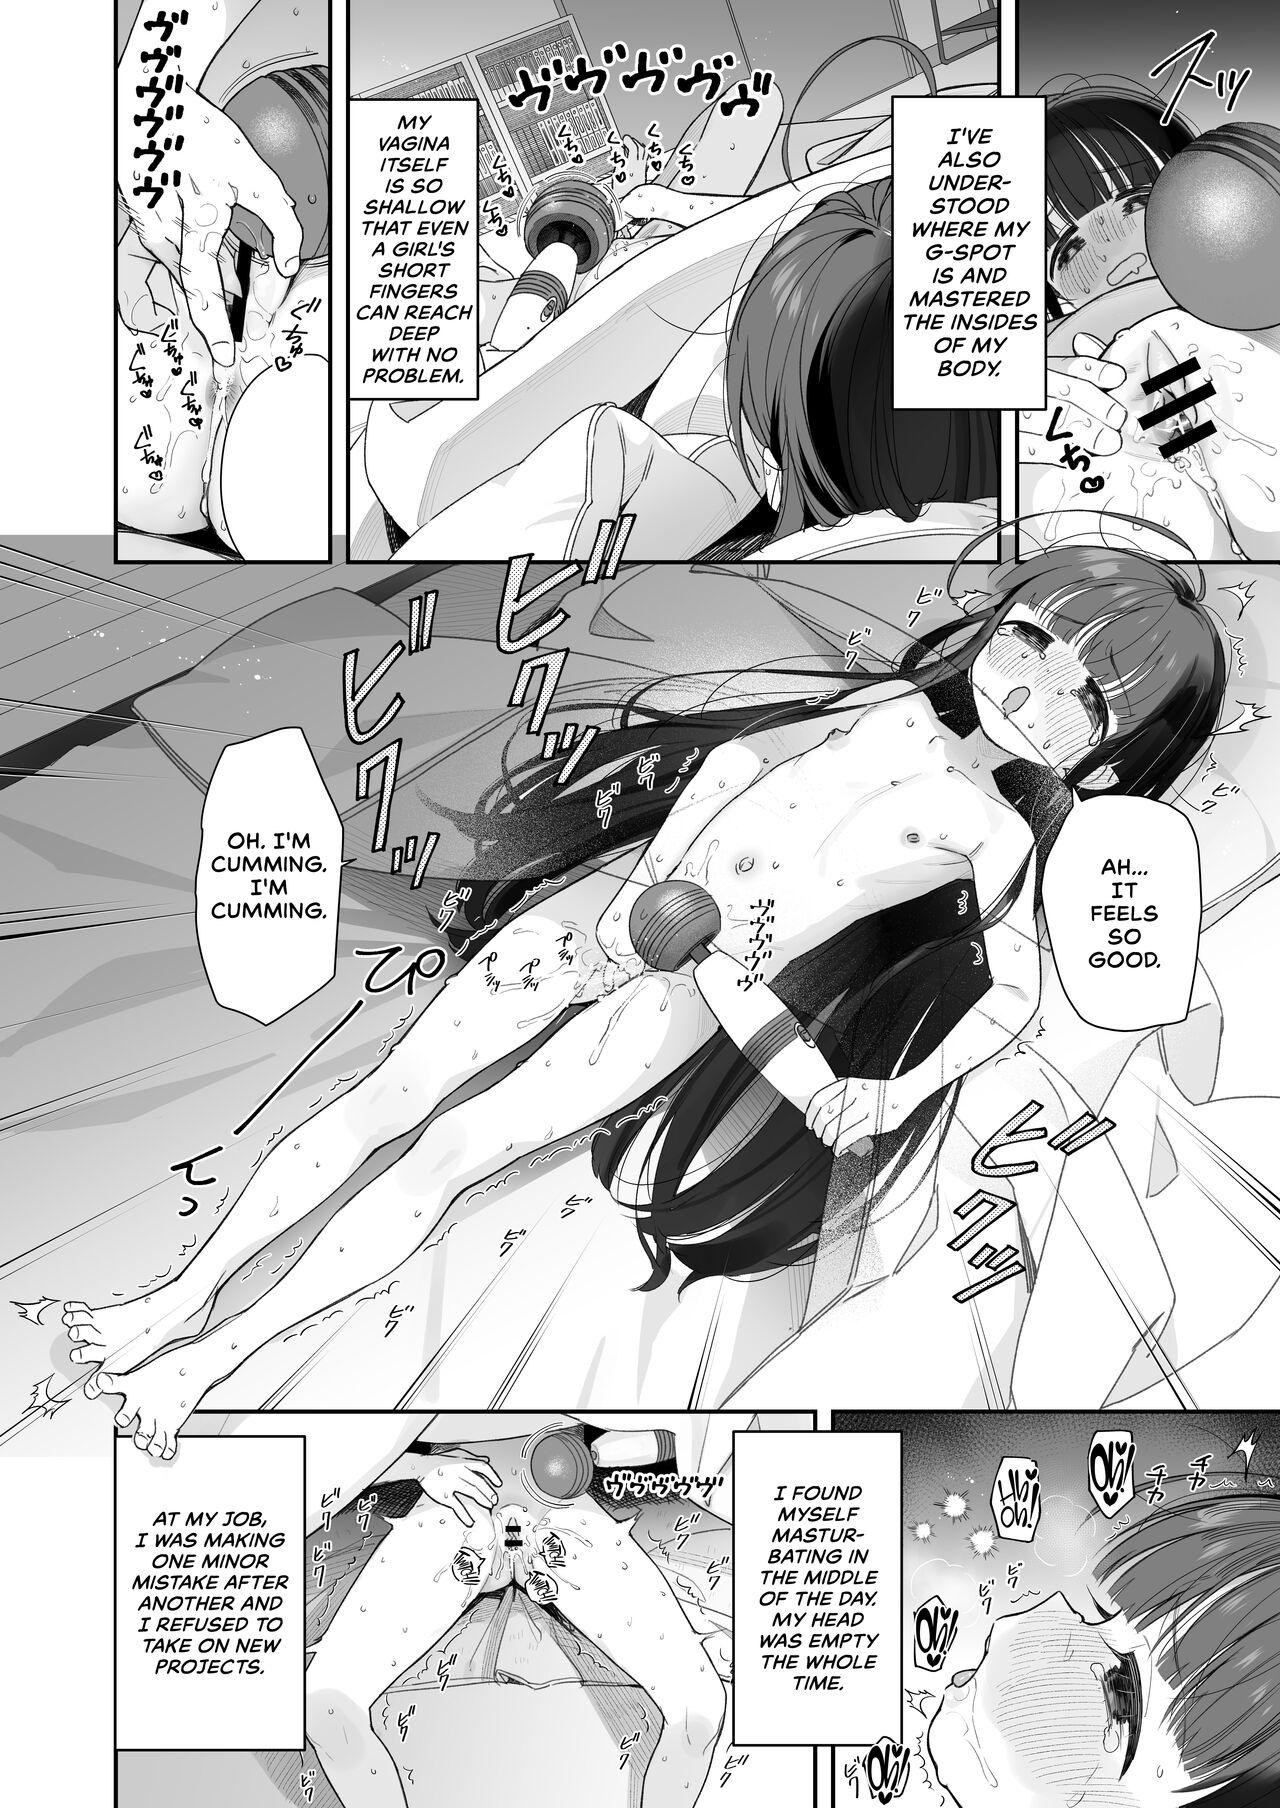 [Asunaro Neat. (Ronna)] TS Loli Oji-san no Bouken Onanie Hen | The Adventures of an Old Man Who Was Gender-Swapped Into a Loli ~Masturbation Chapter~ [English] [CulturedCommissions] [Digital] 24